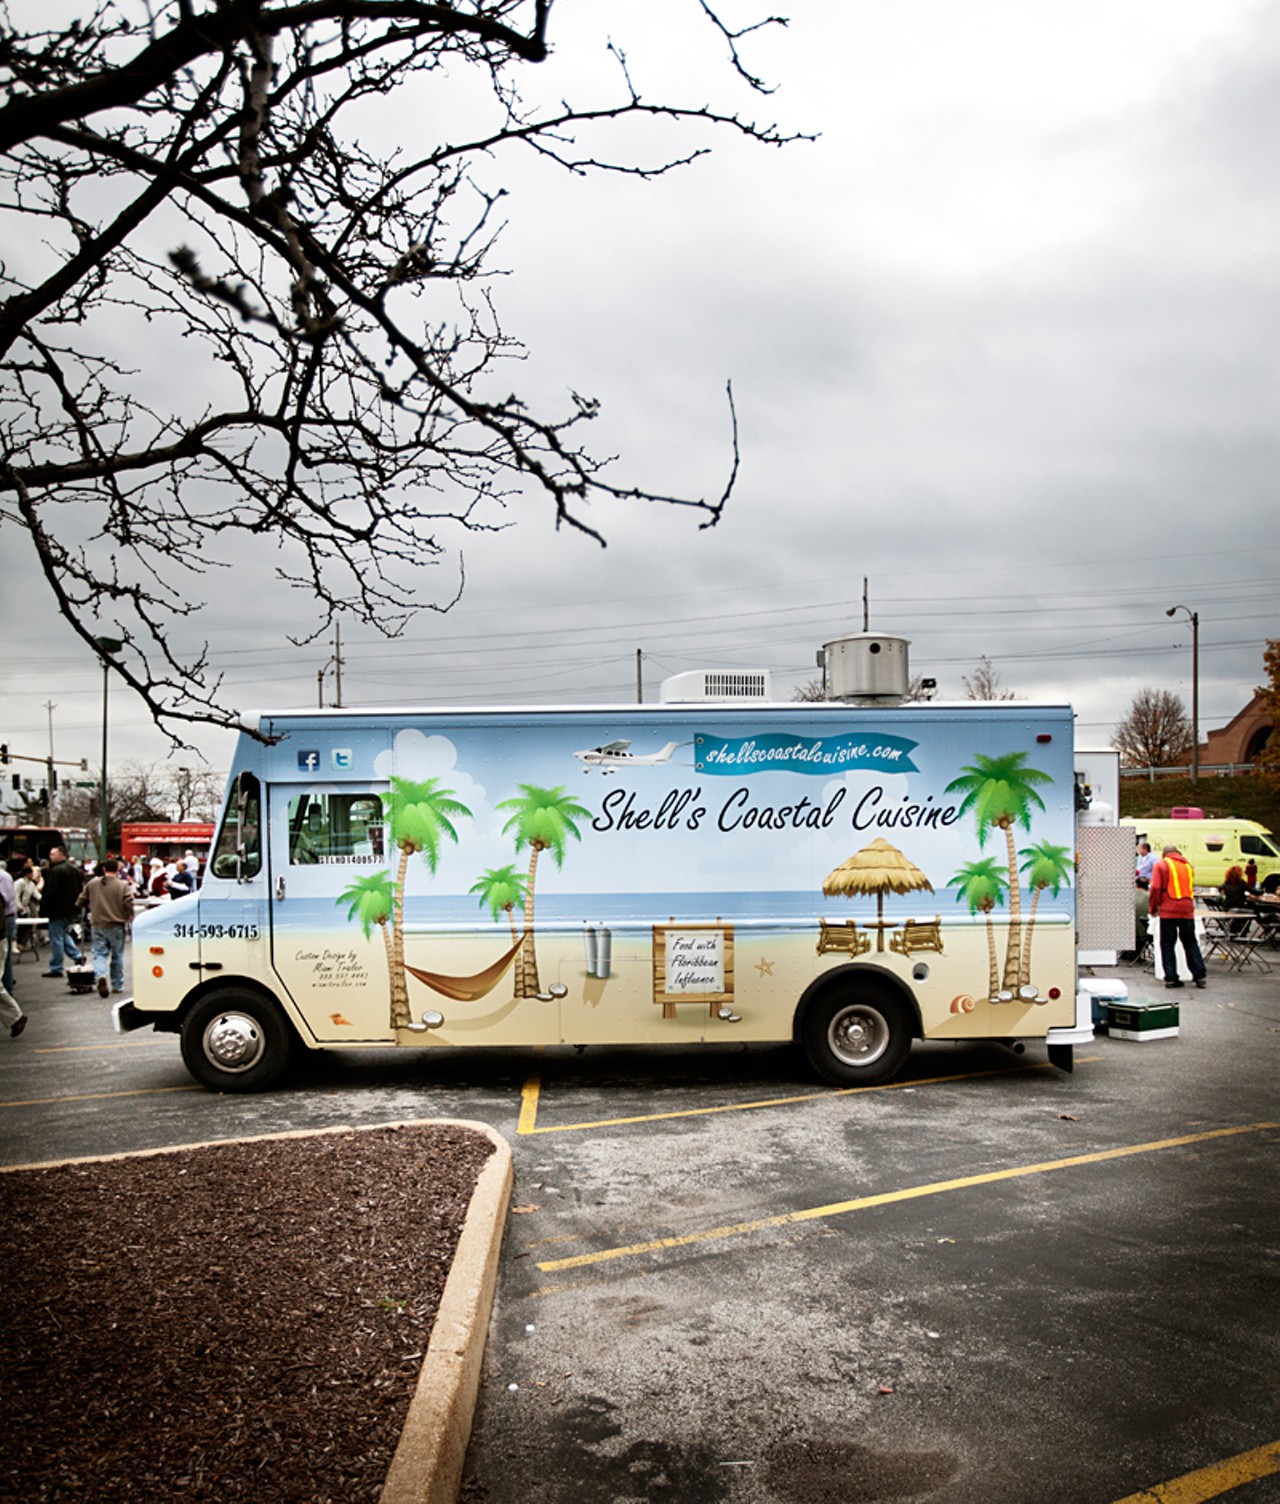 Shell's Coastal Cusine at last Saturday's Art Feast in the Crestwood Court parking Lot. Miami Trailer customized the truck for owner Shelley McMahan, inside and out. The truck had formerly been a Lance Cracker Truck.